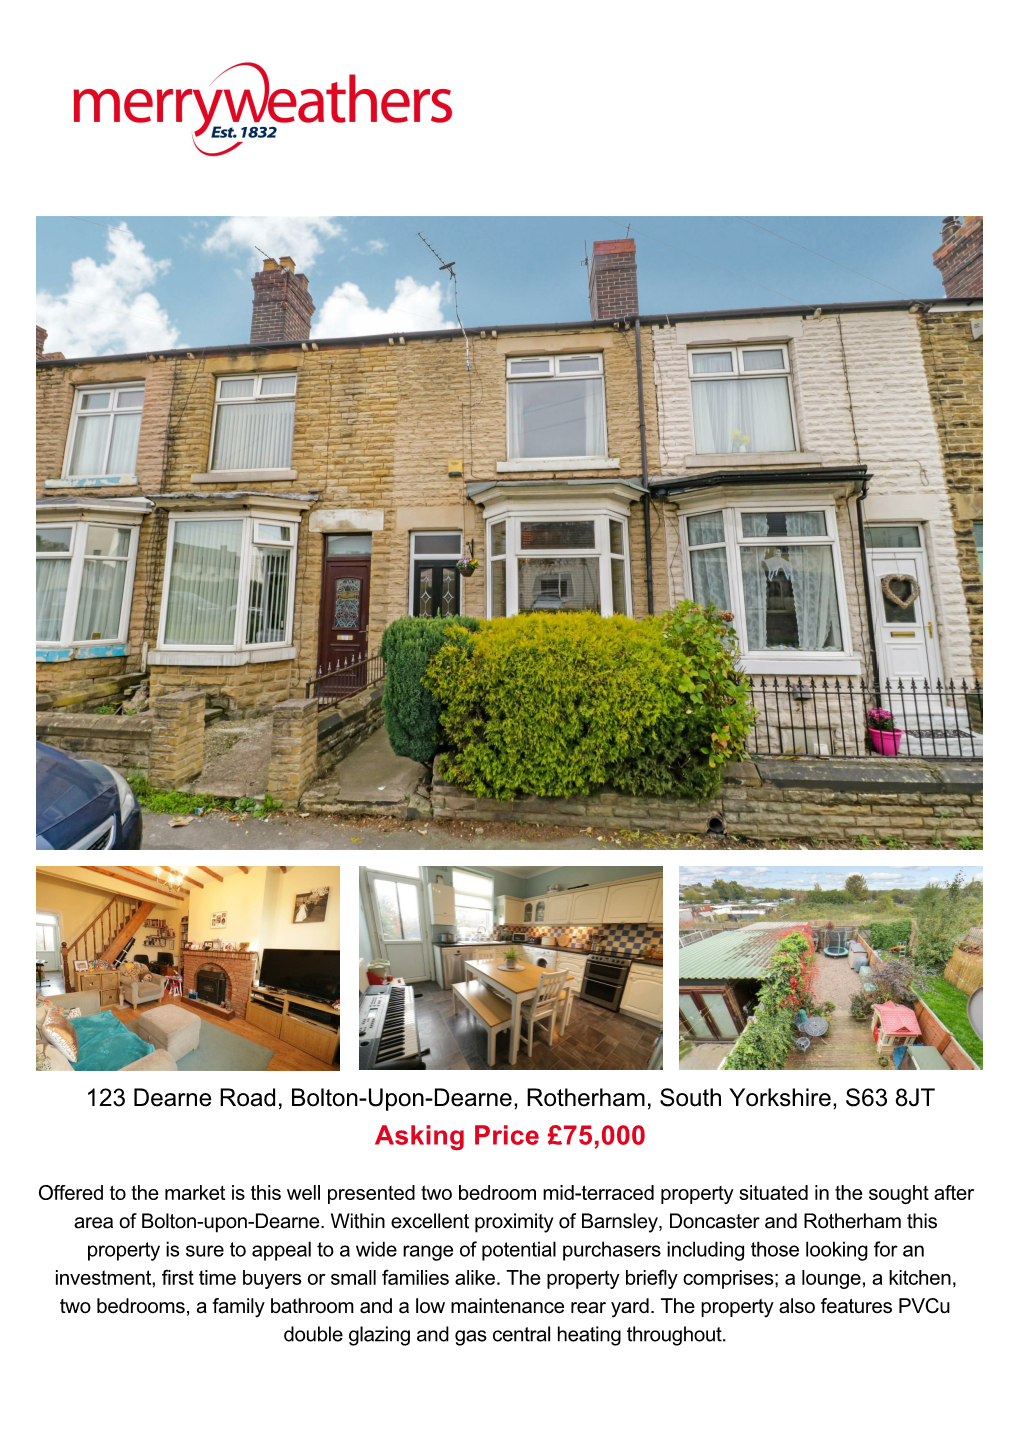 Dearne Road, Bolton-Upon-Dearne, Rotherham, South Yorkshire, S63 8JT Asking Price £75,000